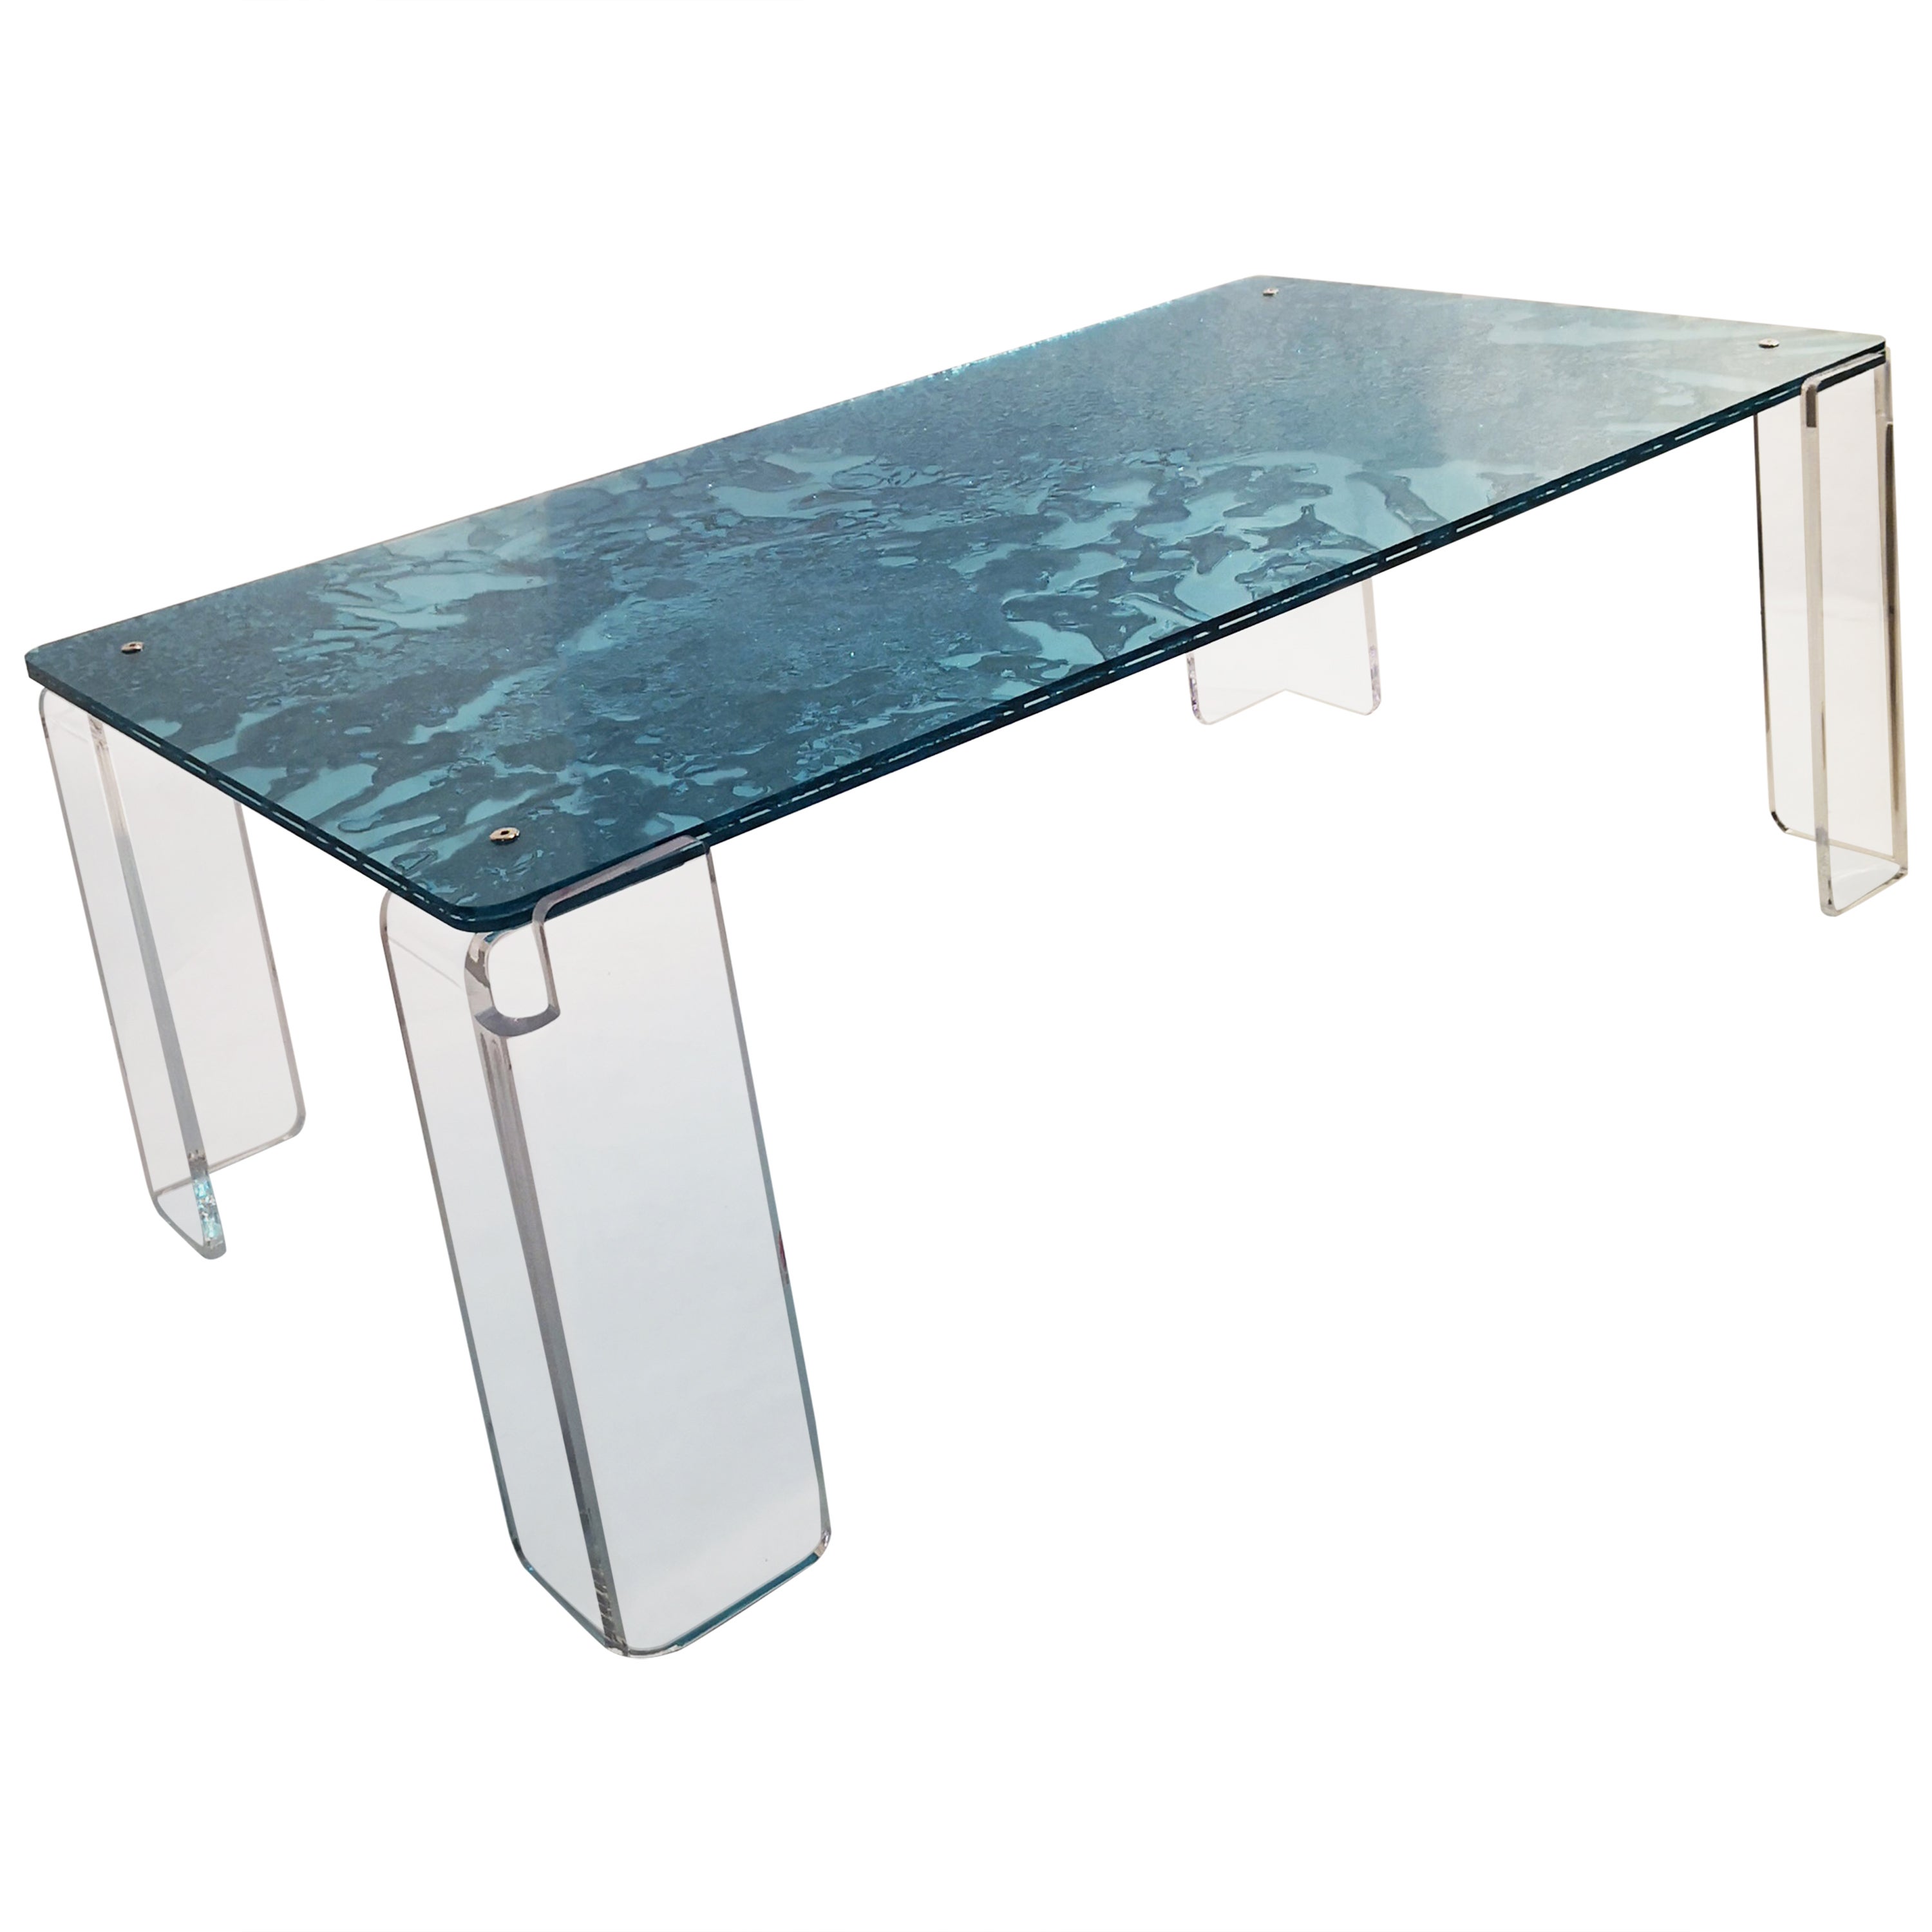 Sketch Coffee Table Made in Acrylic Four Legs Design Roberto Giacomucci in 2022 For Sale